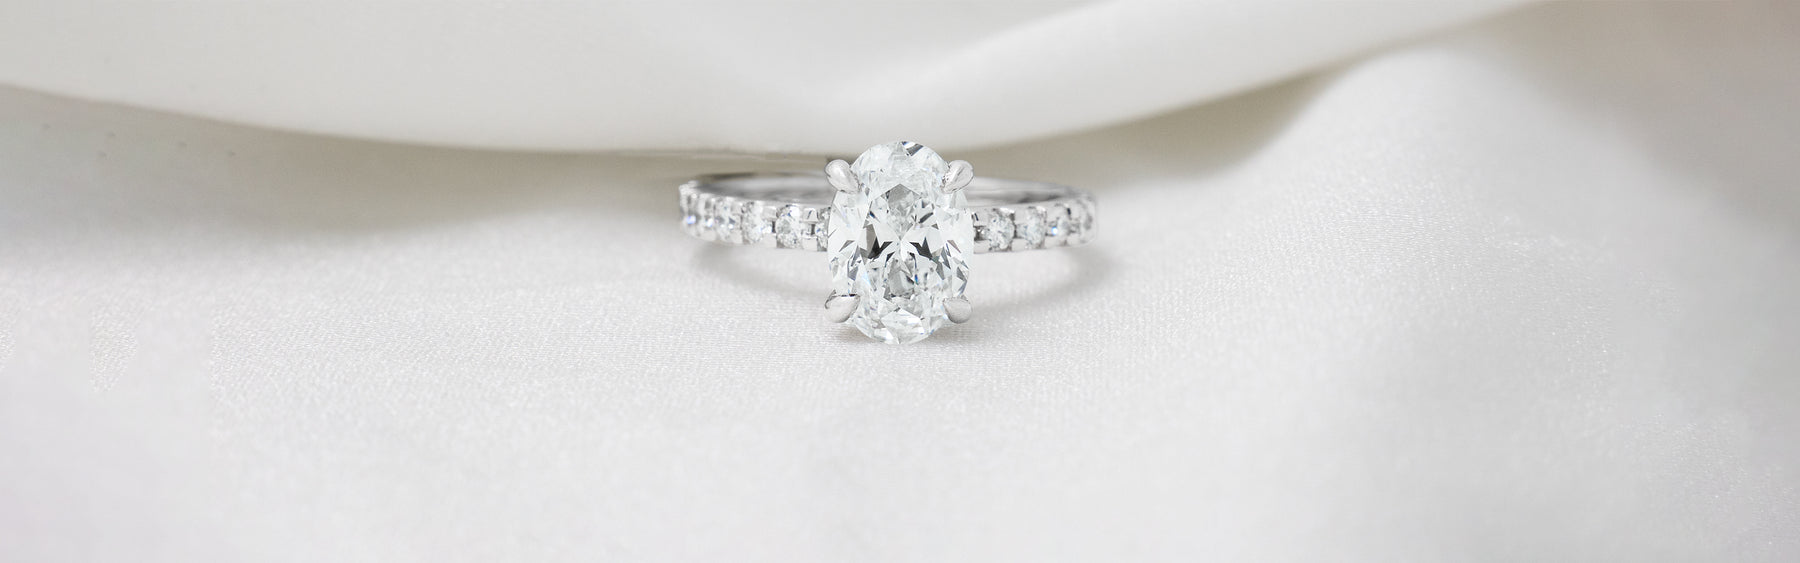 Oval cut Diamond Solitaire Engagement Ring in Platinum